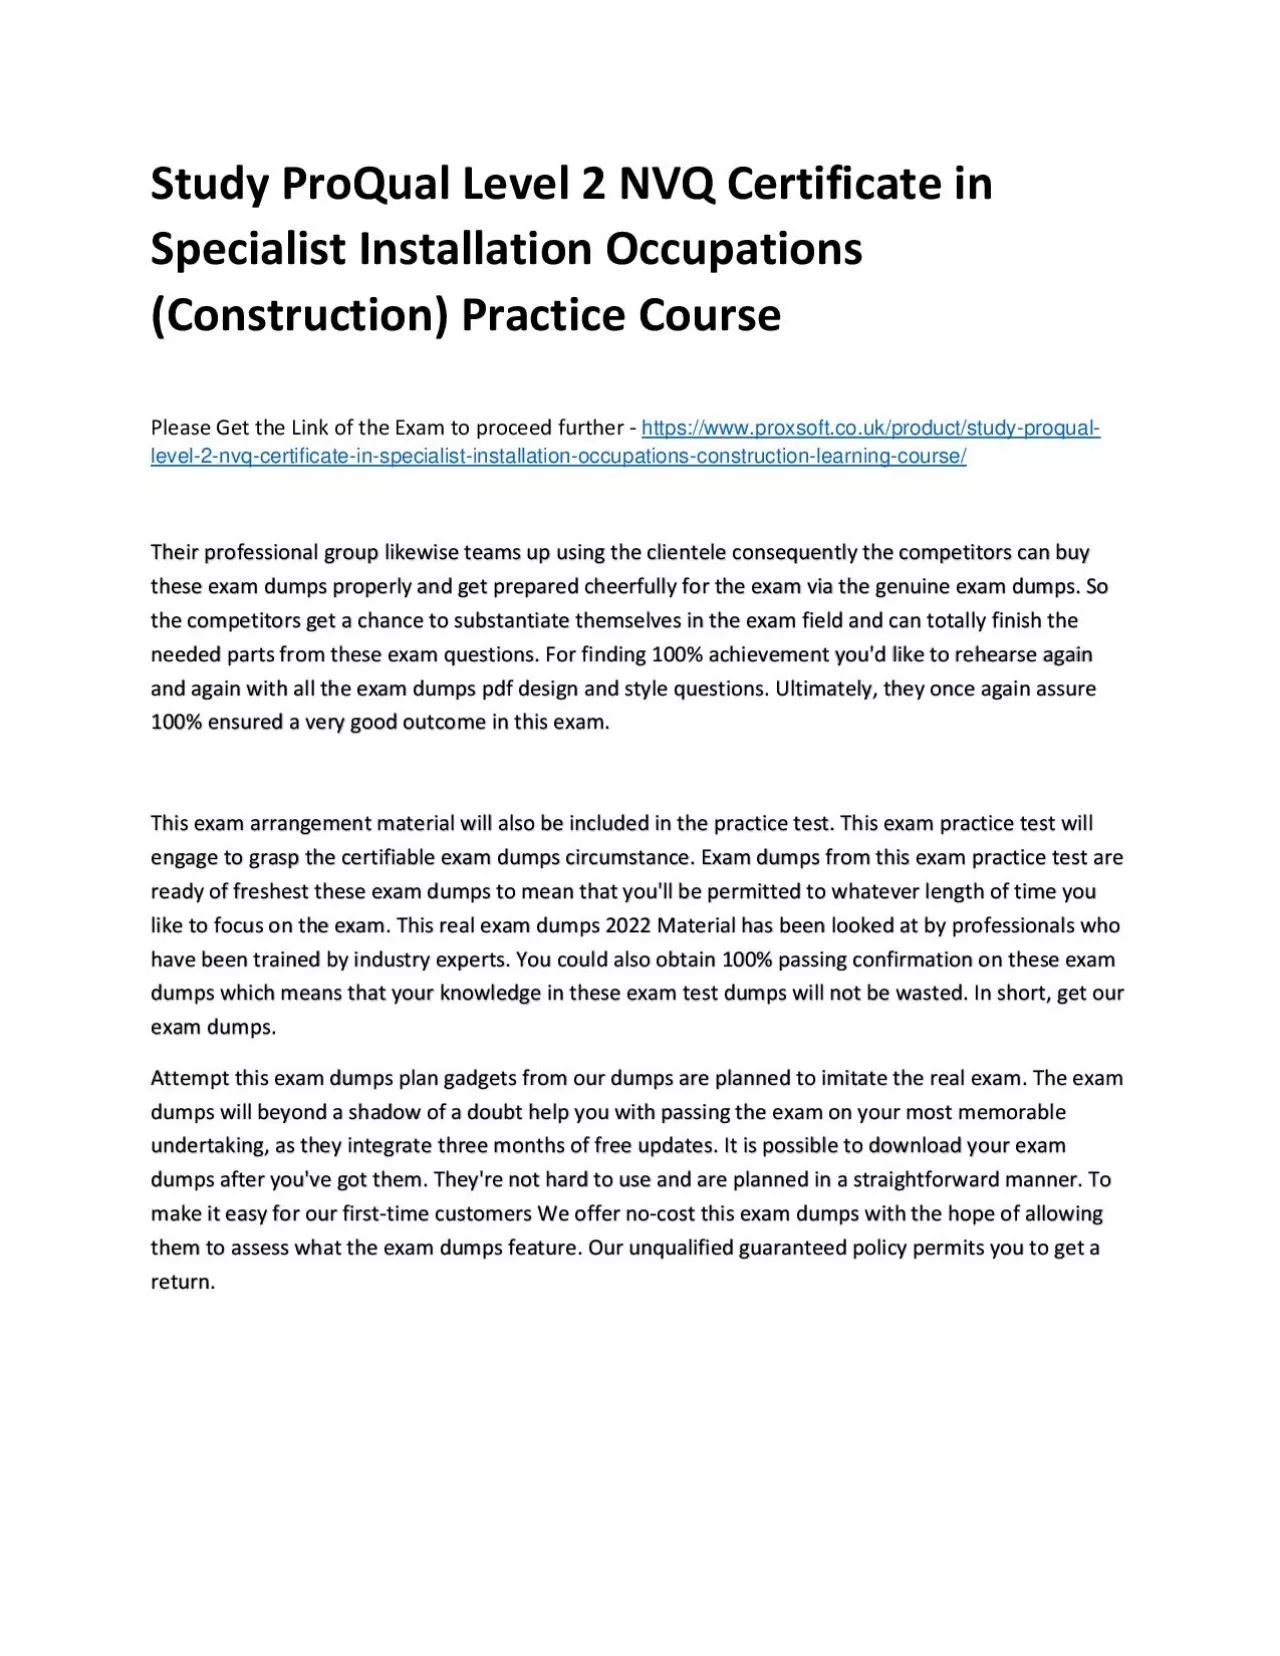 Study ProQual Level 2 NVQ Certificate in Specialist Installation Occupations (Construction)